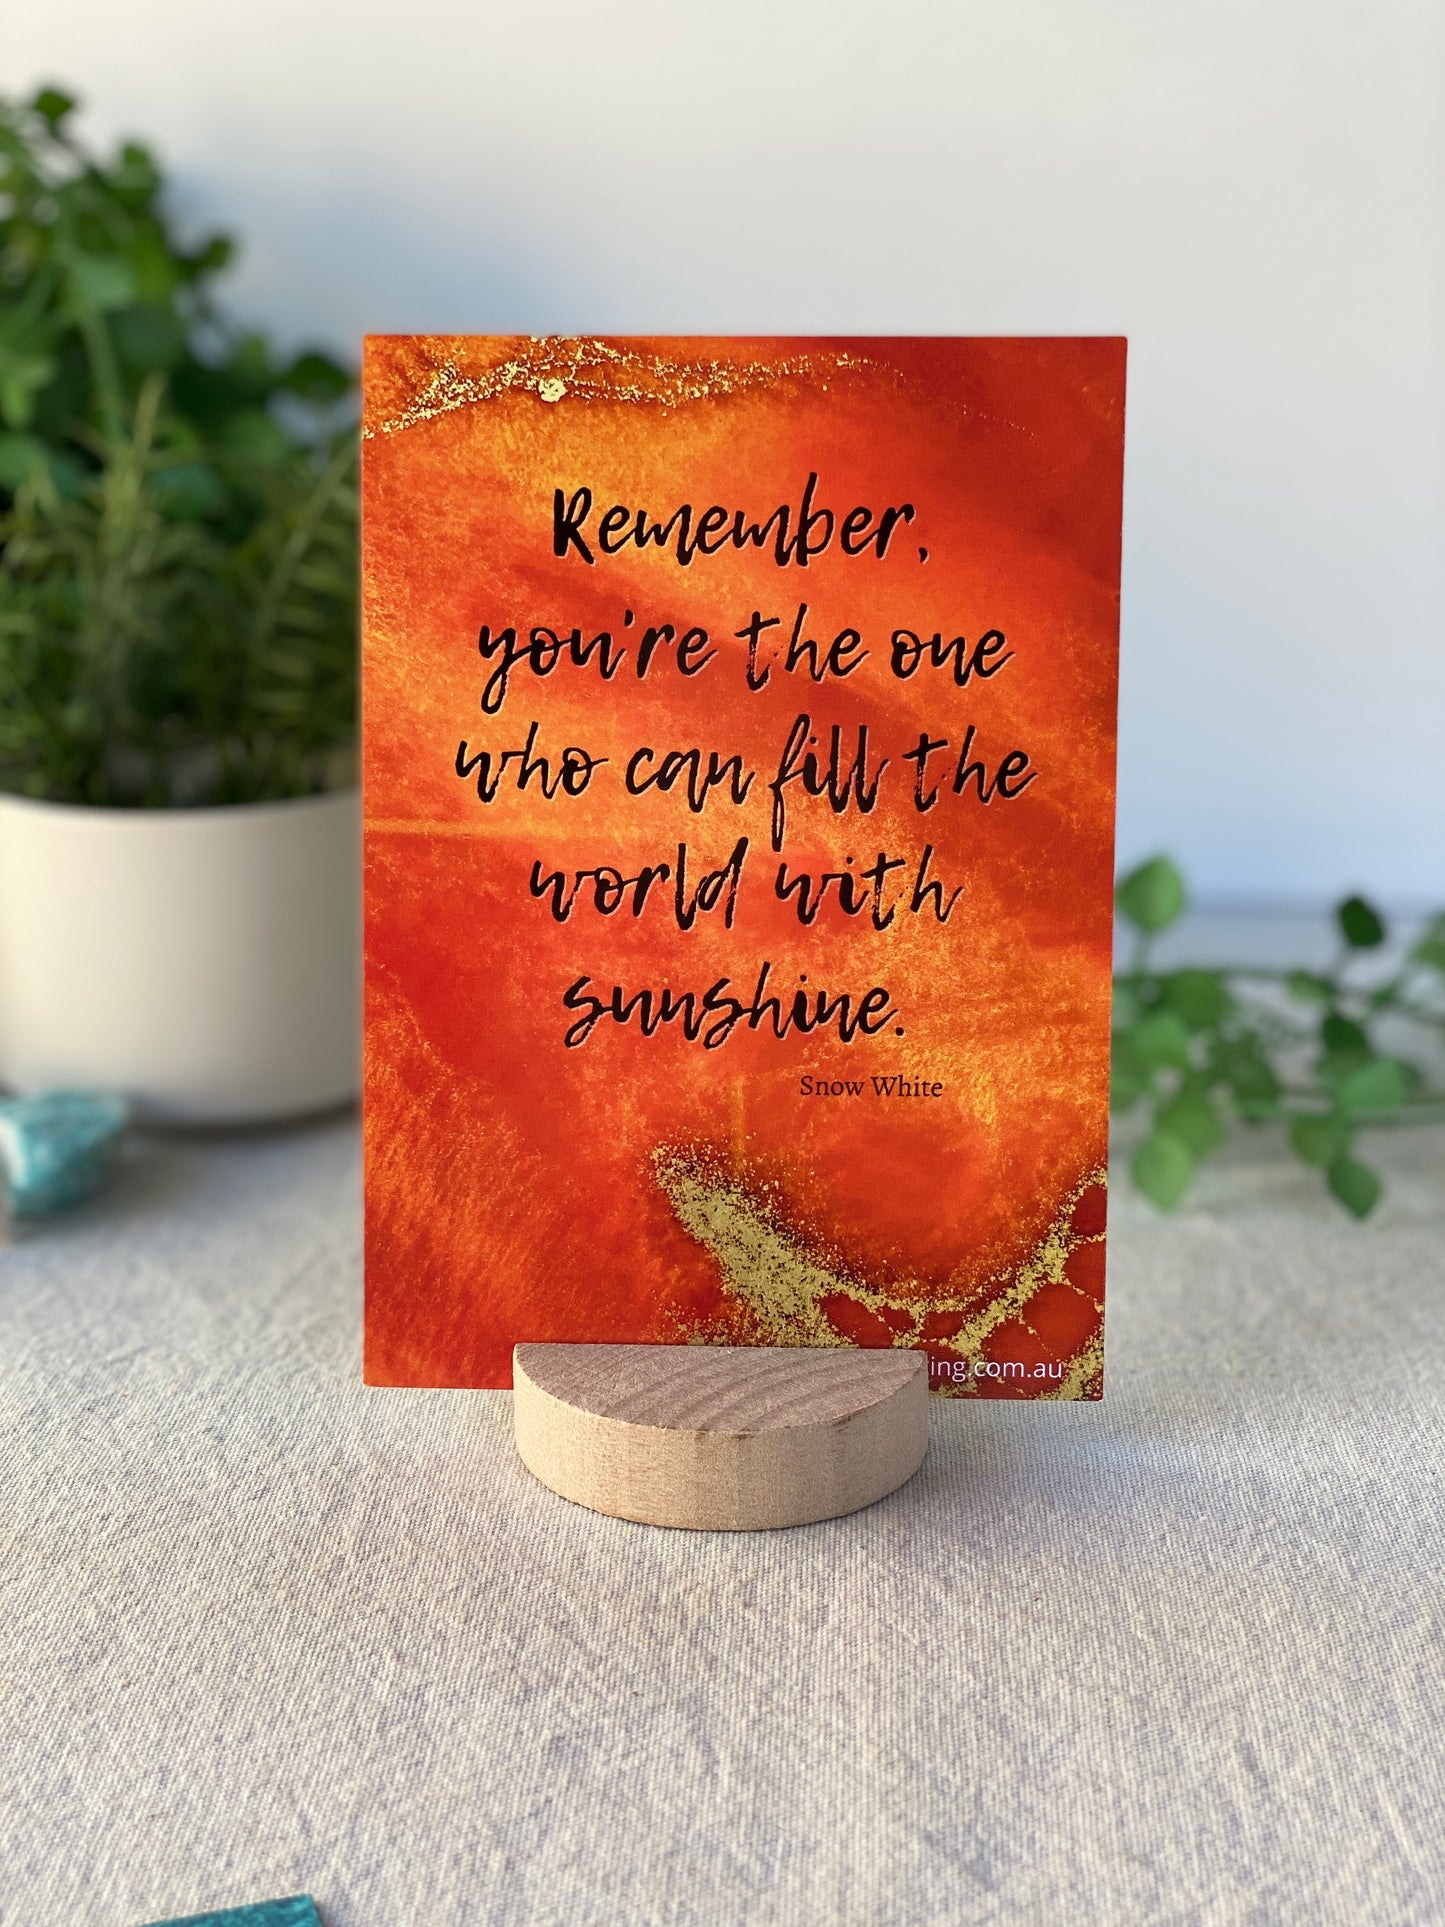 Resinating Words - Words that resonate - 20 pack deck of inspirational cards